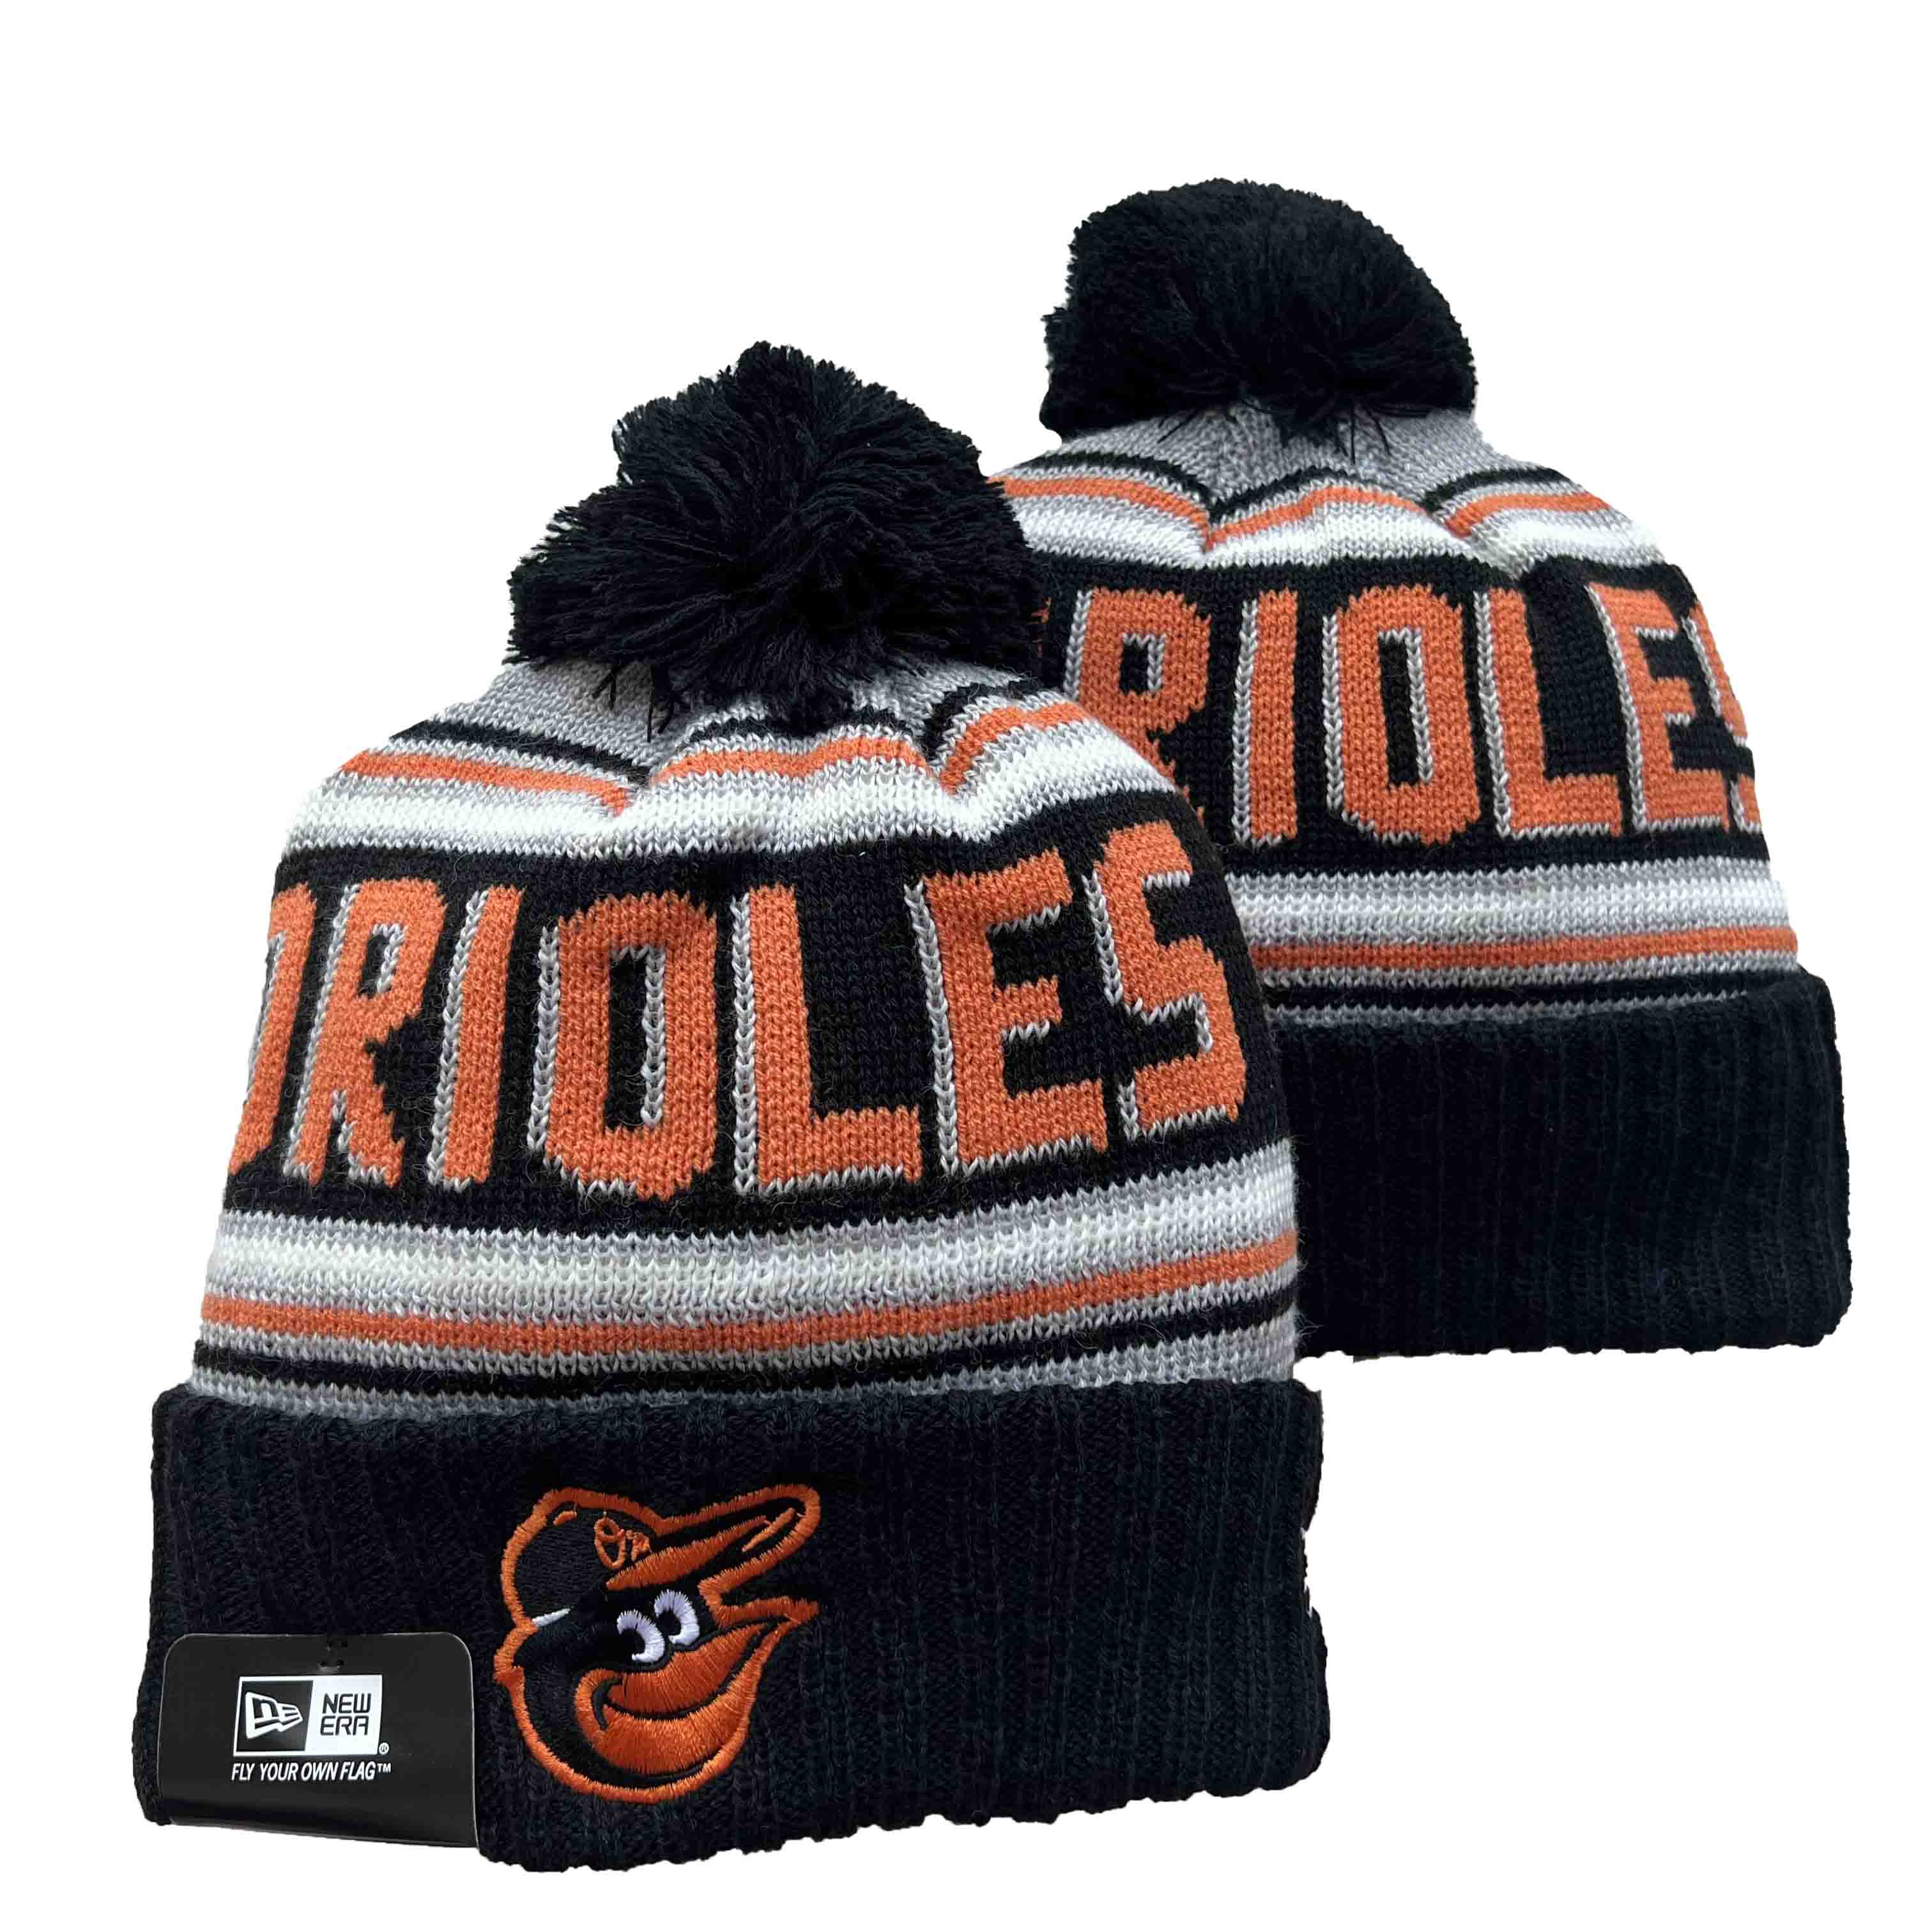 MLB Baltimore Orioles Beanies Knit Hats-YD102